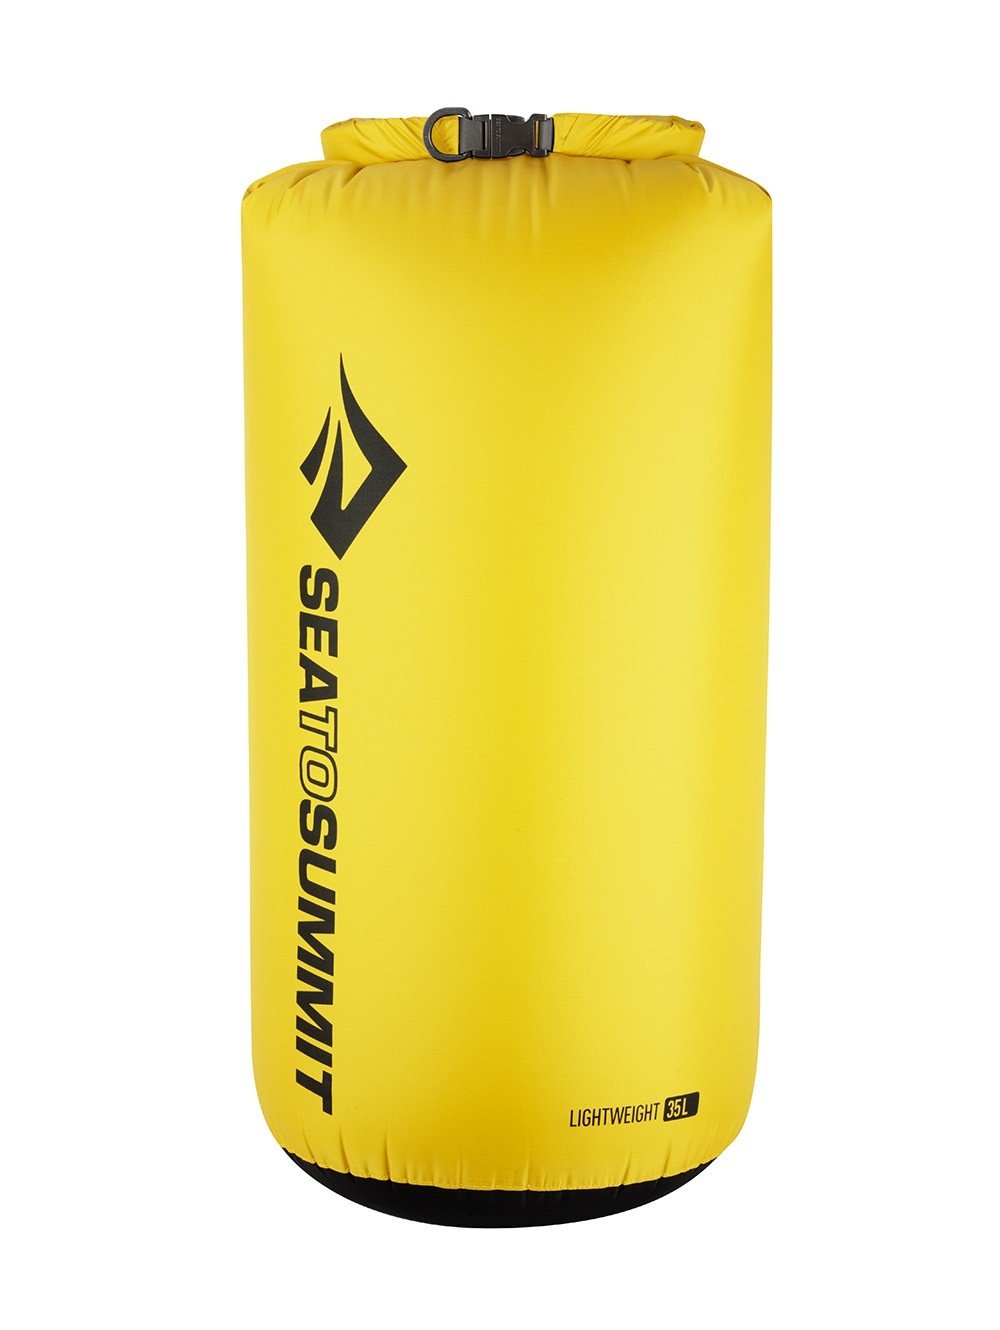 Sea To Summit Lightweight 70D 35 Litres Dry Sack Bags, Packs and Cases Sea To Summit Yellow Tactical Gear Supplier Tactical Distributors Australia